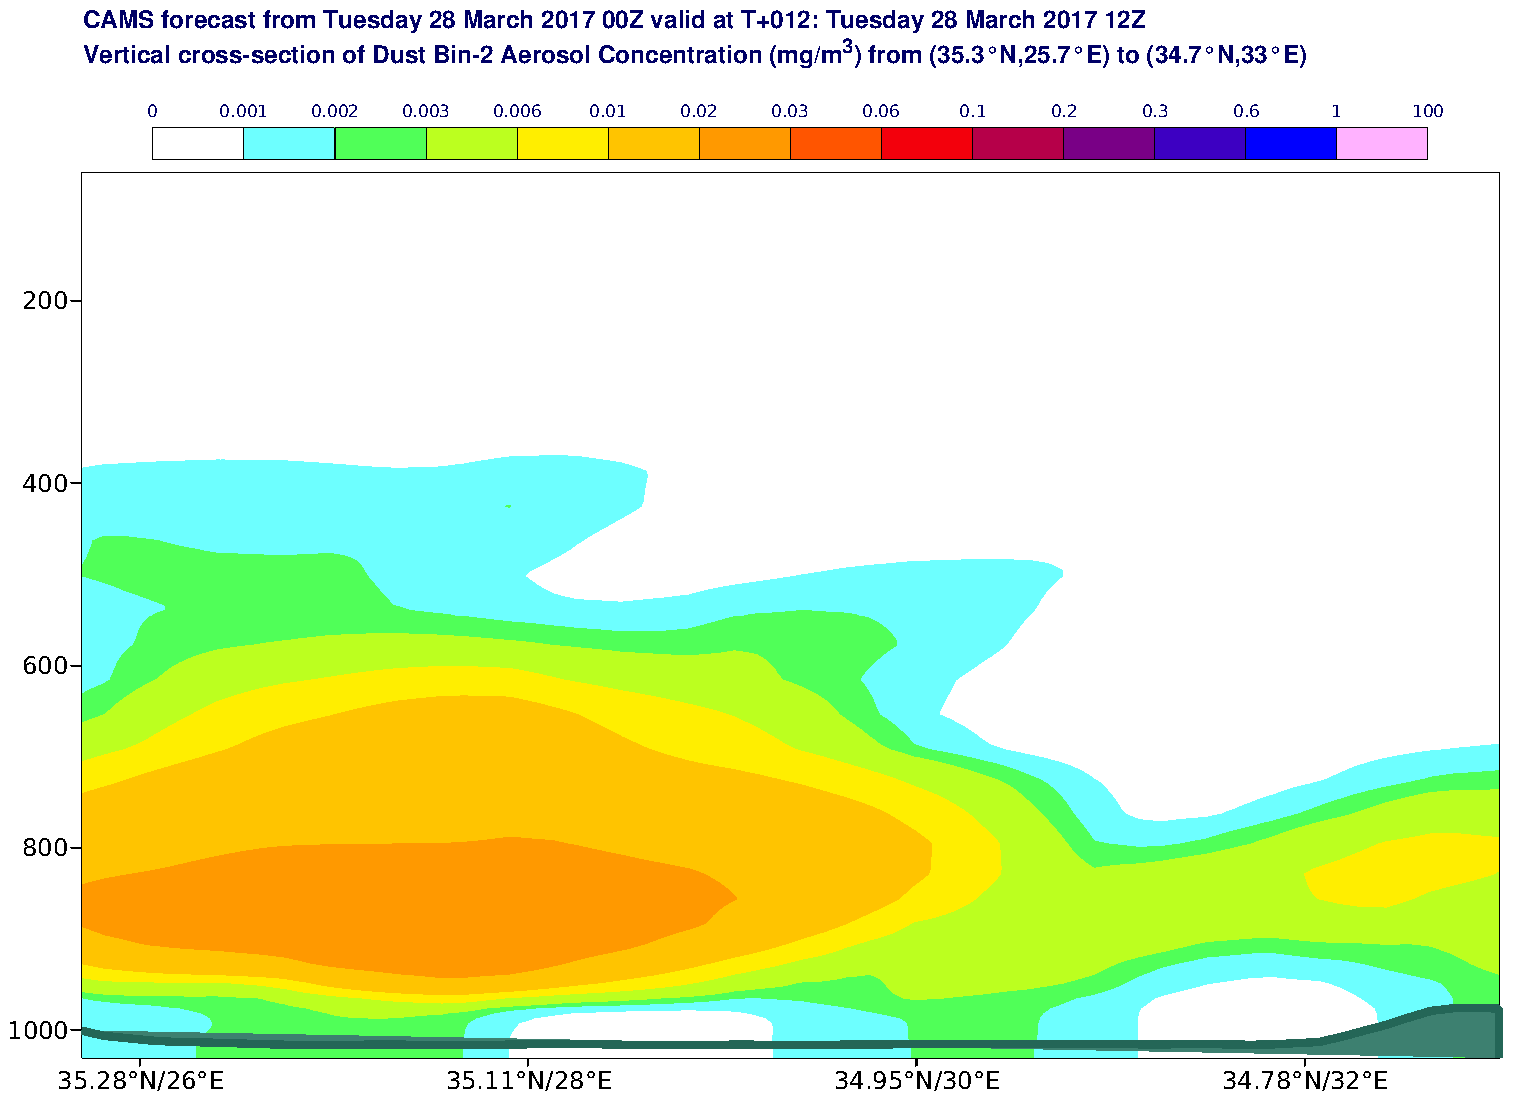 Vertical cross-section of Dust Bin-2 Aerosol Concentration (mg/m3) valid at T12 - 2017-03-28 12:00